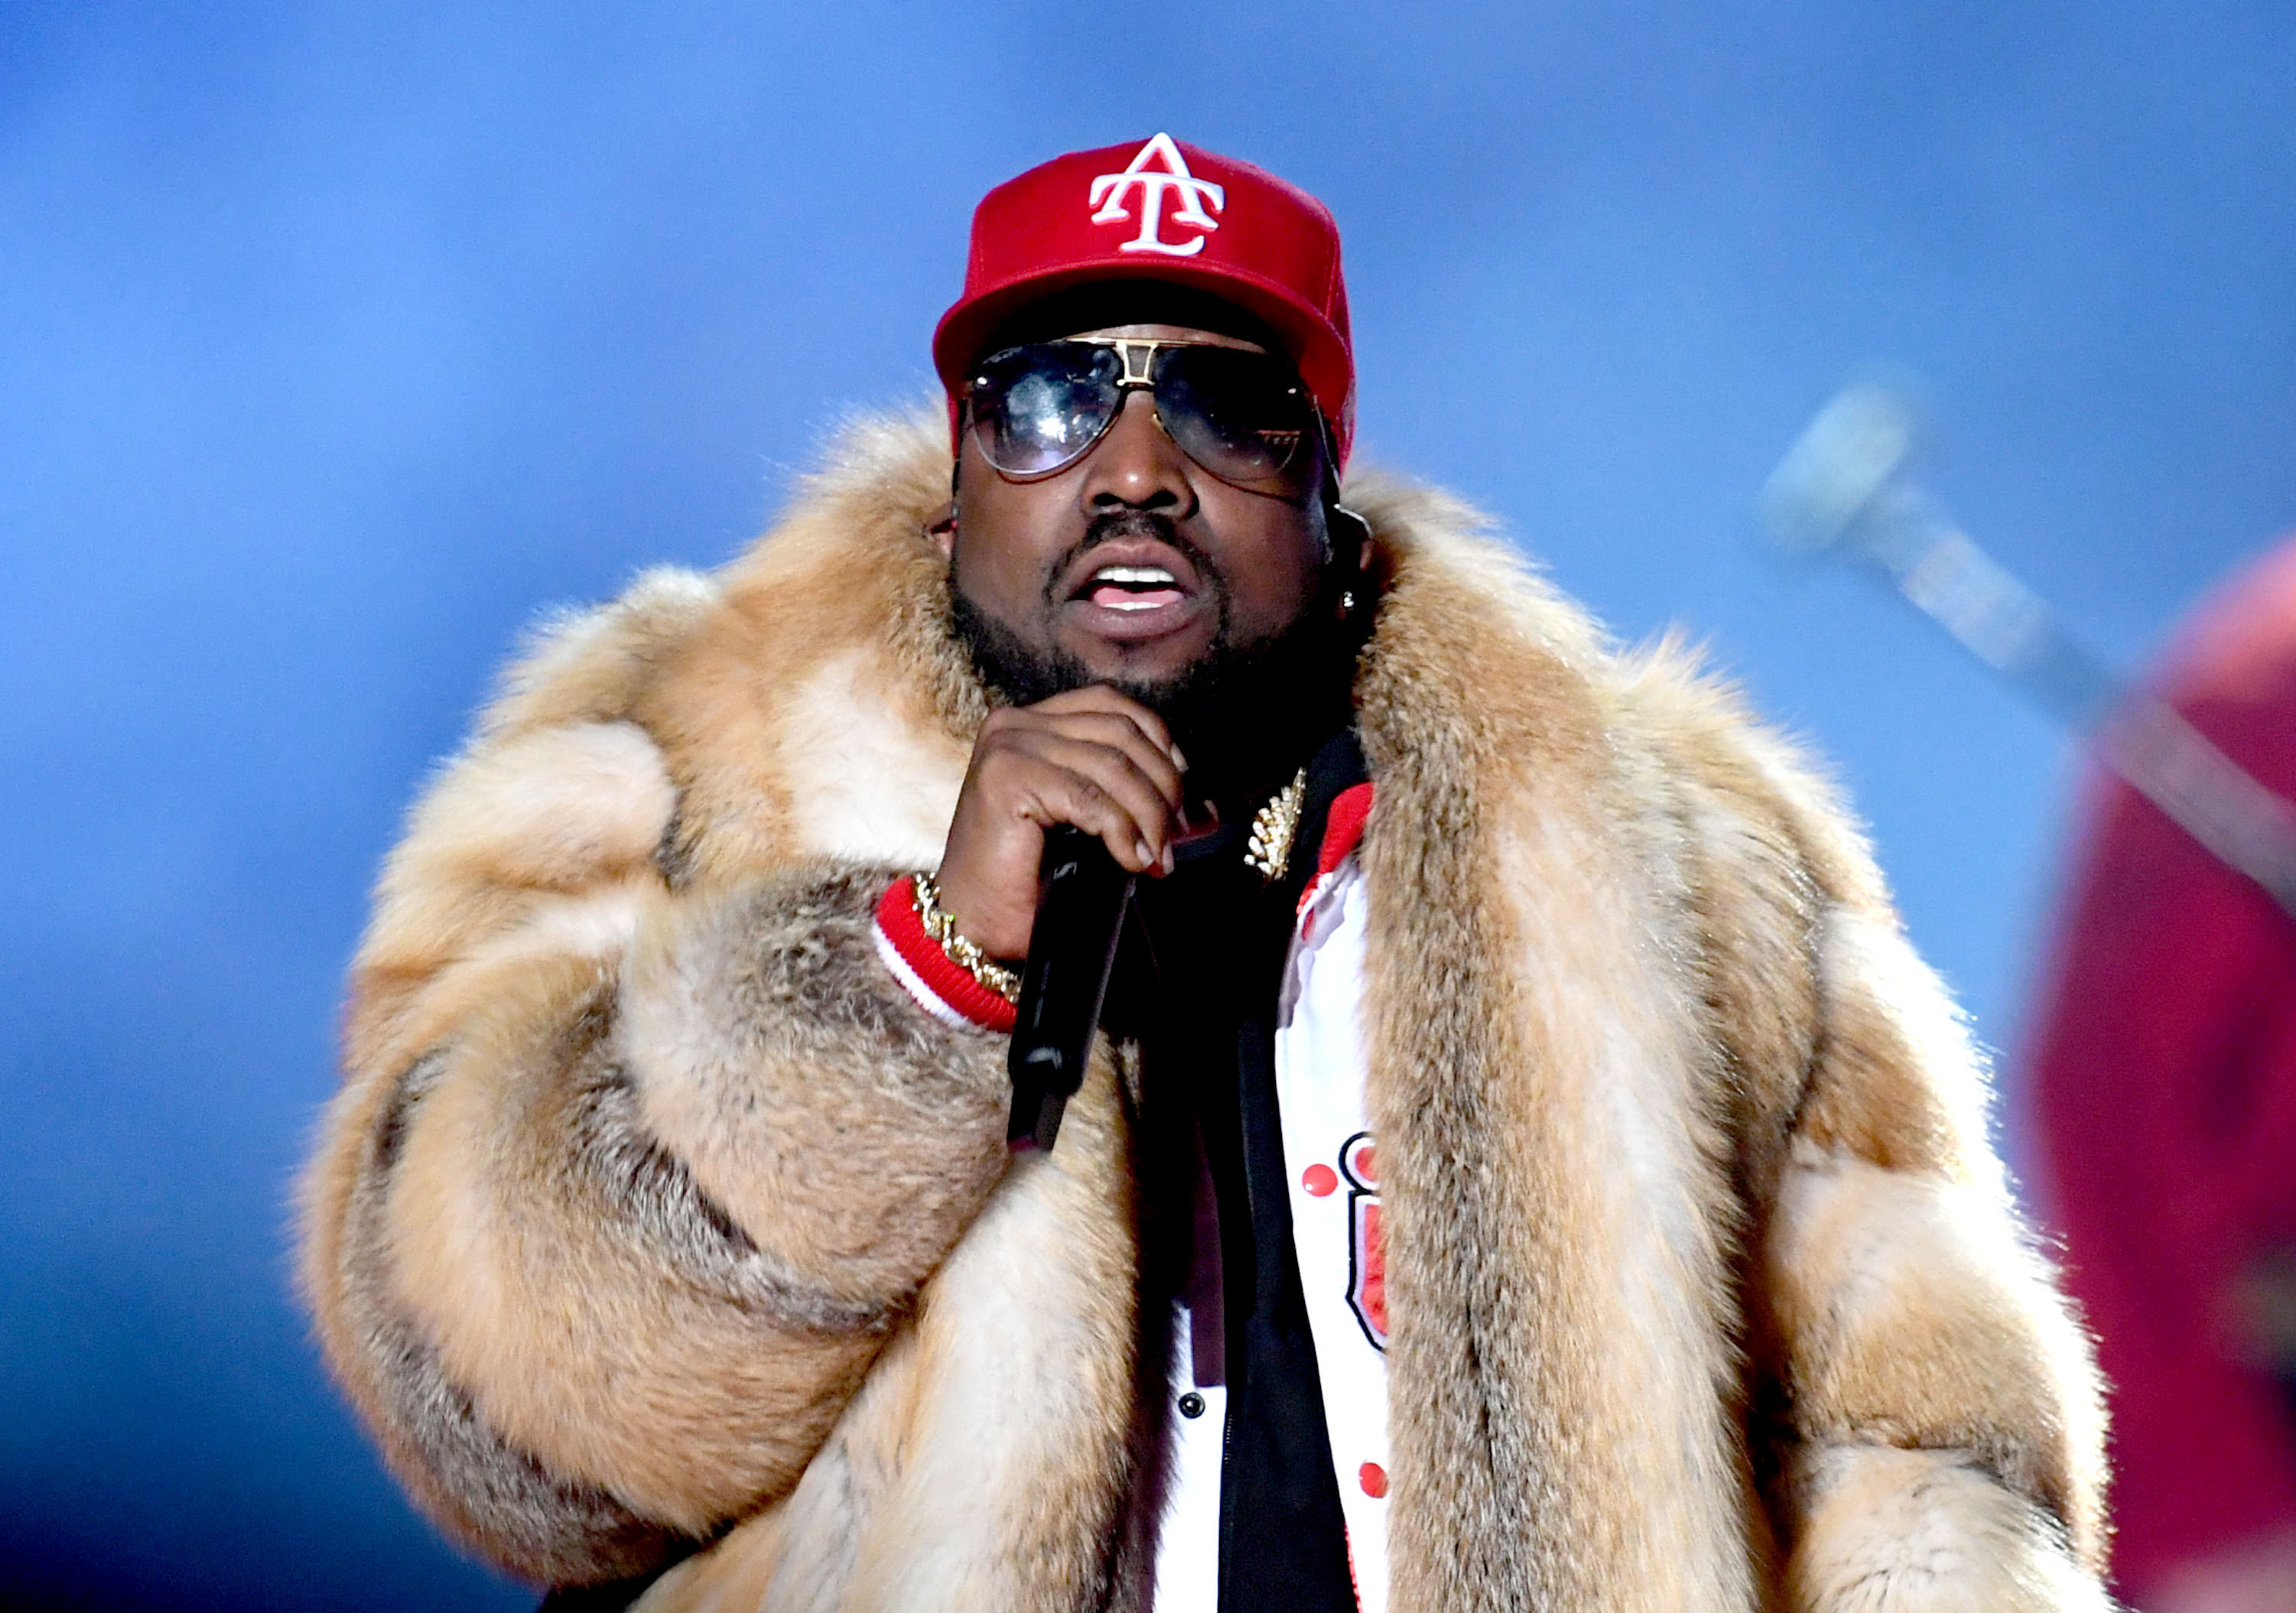 Big Boi performing at the Super Bowl Halftime Show in 2019